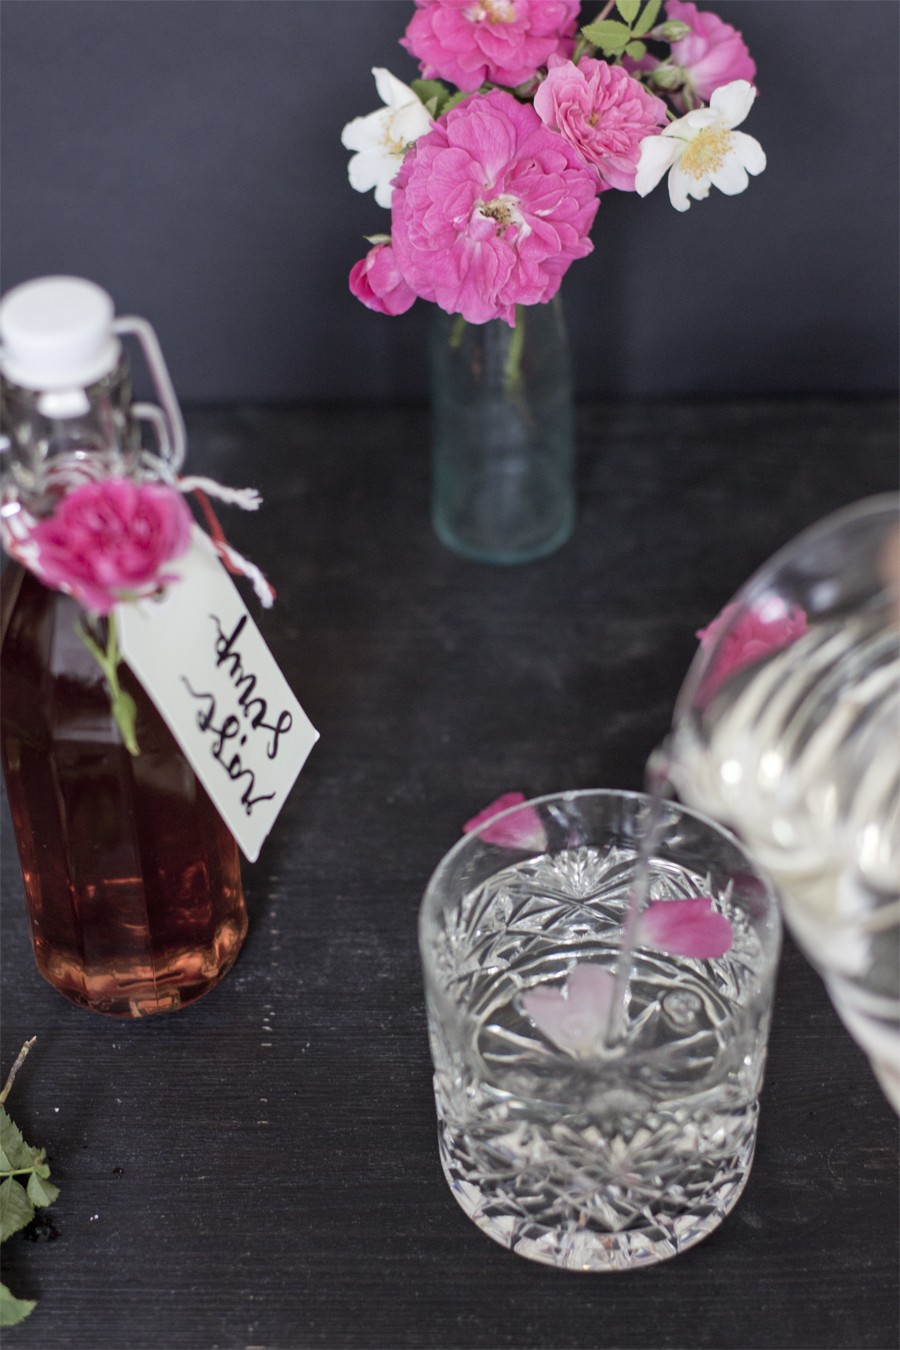 Rose syrup recipe | LOOK WHAT I MADE ...